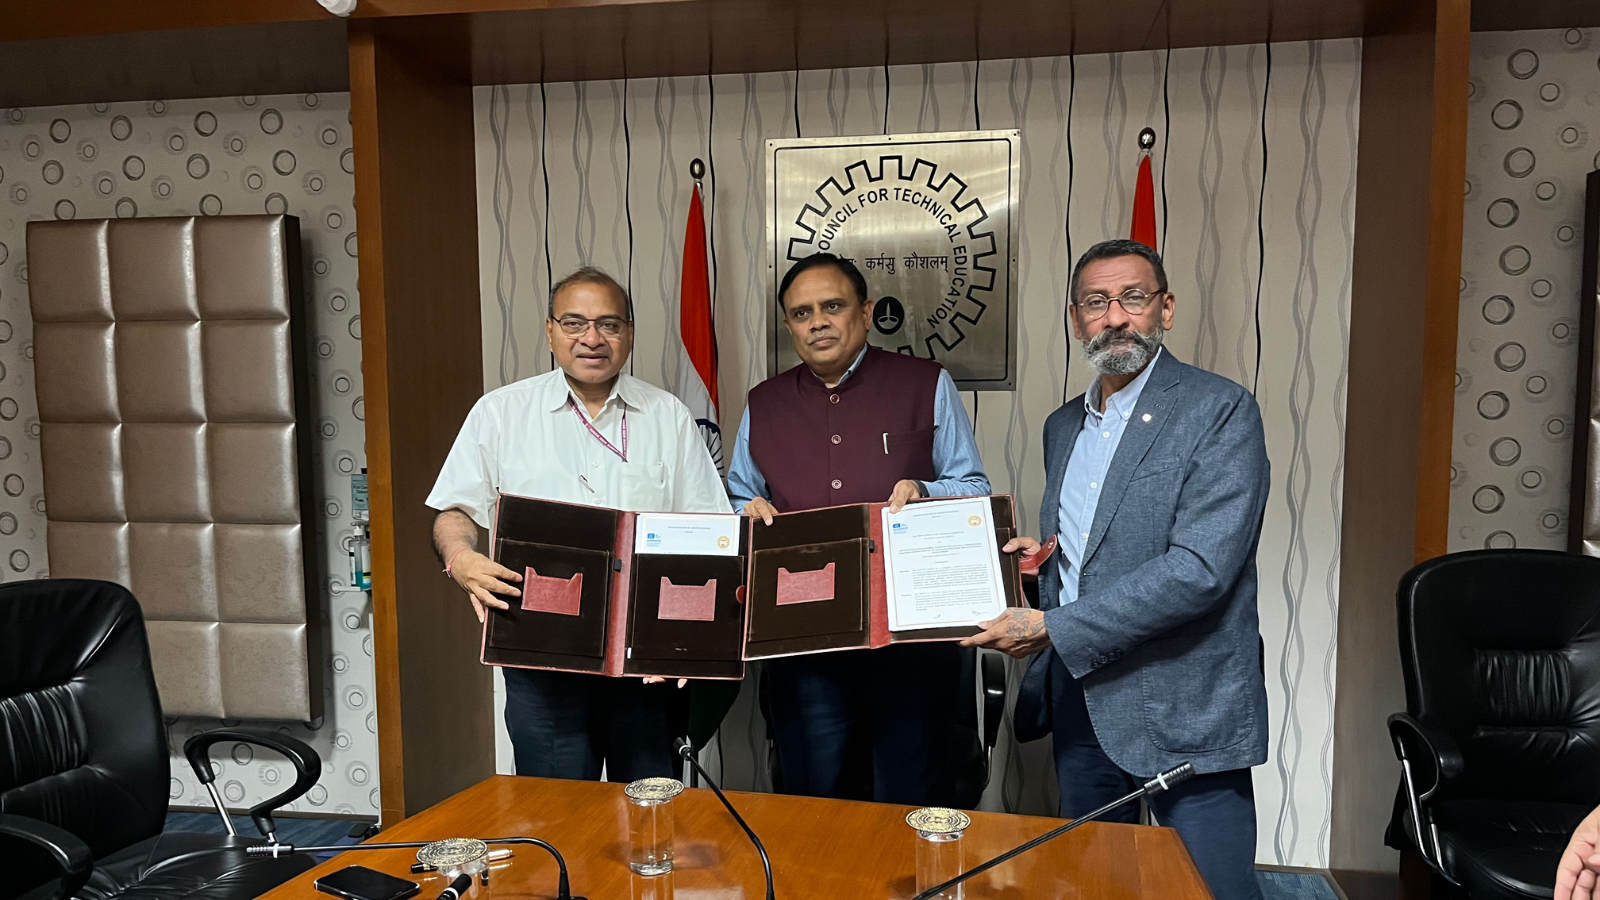 UNESCO MGIEP and the All India Council for Technical Education (AICTE) signs MoU to enhance Digital Pedagogy and Social and Emotional Learning (SEL) in India